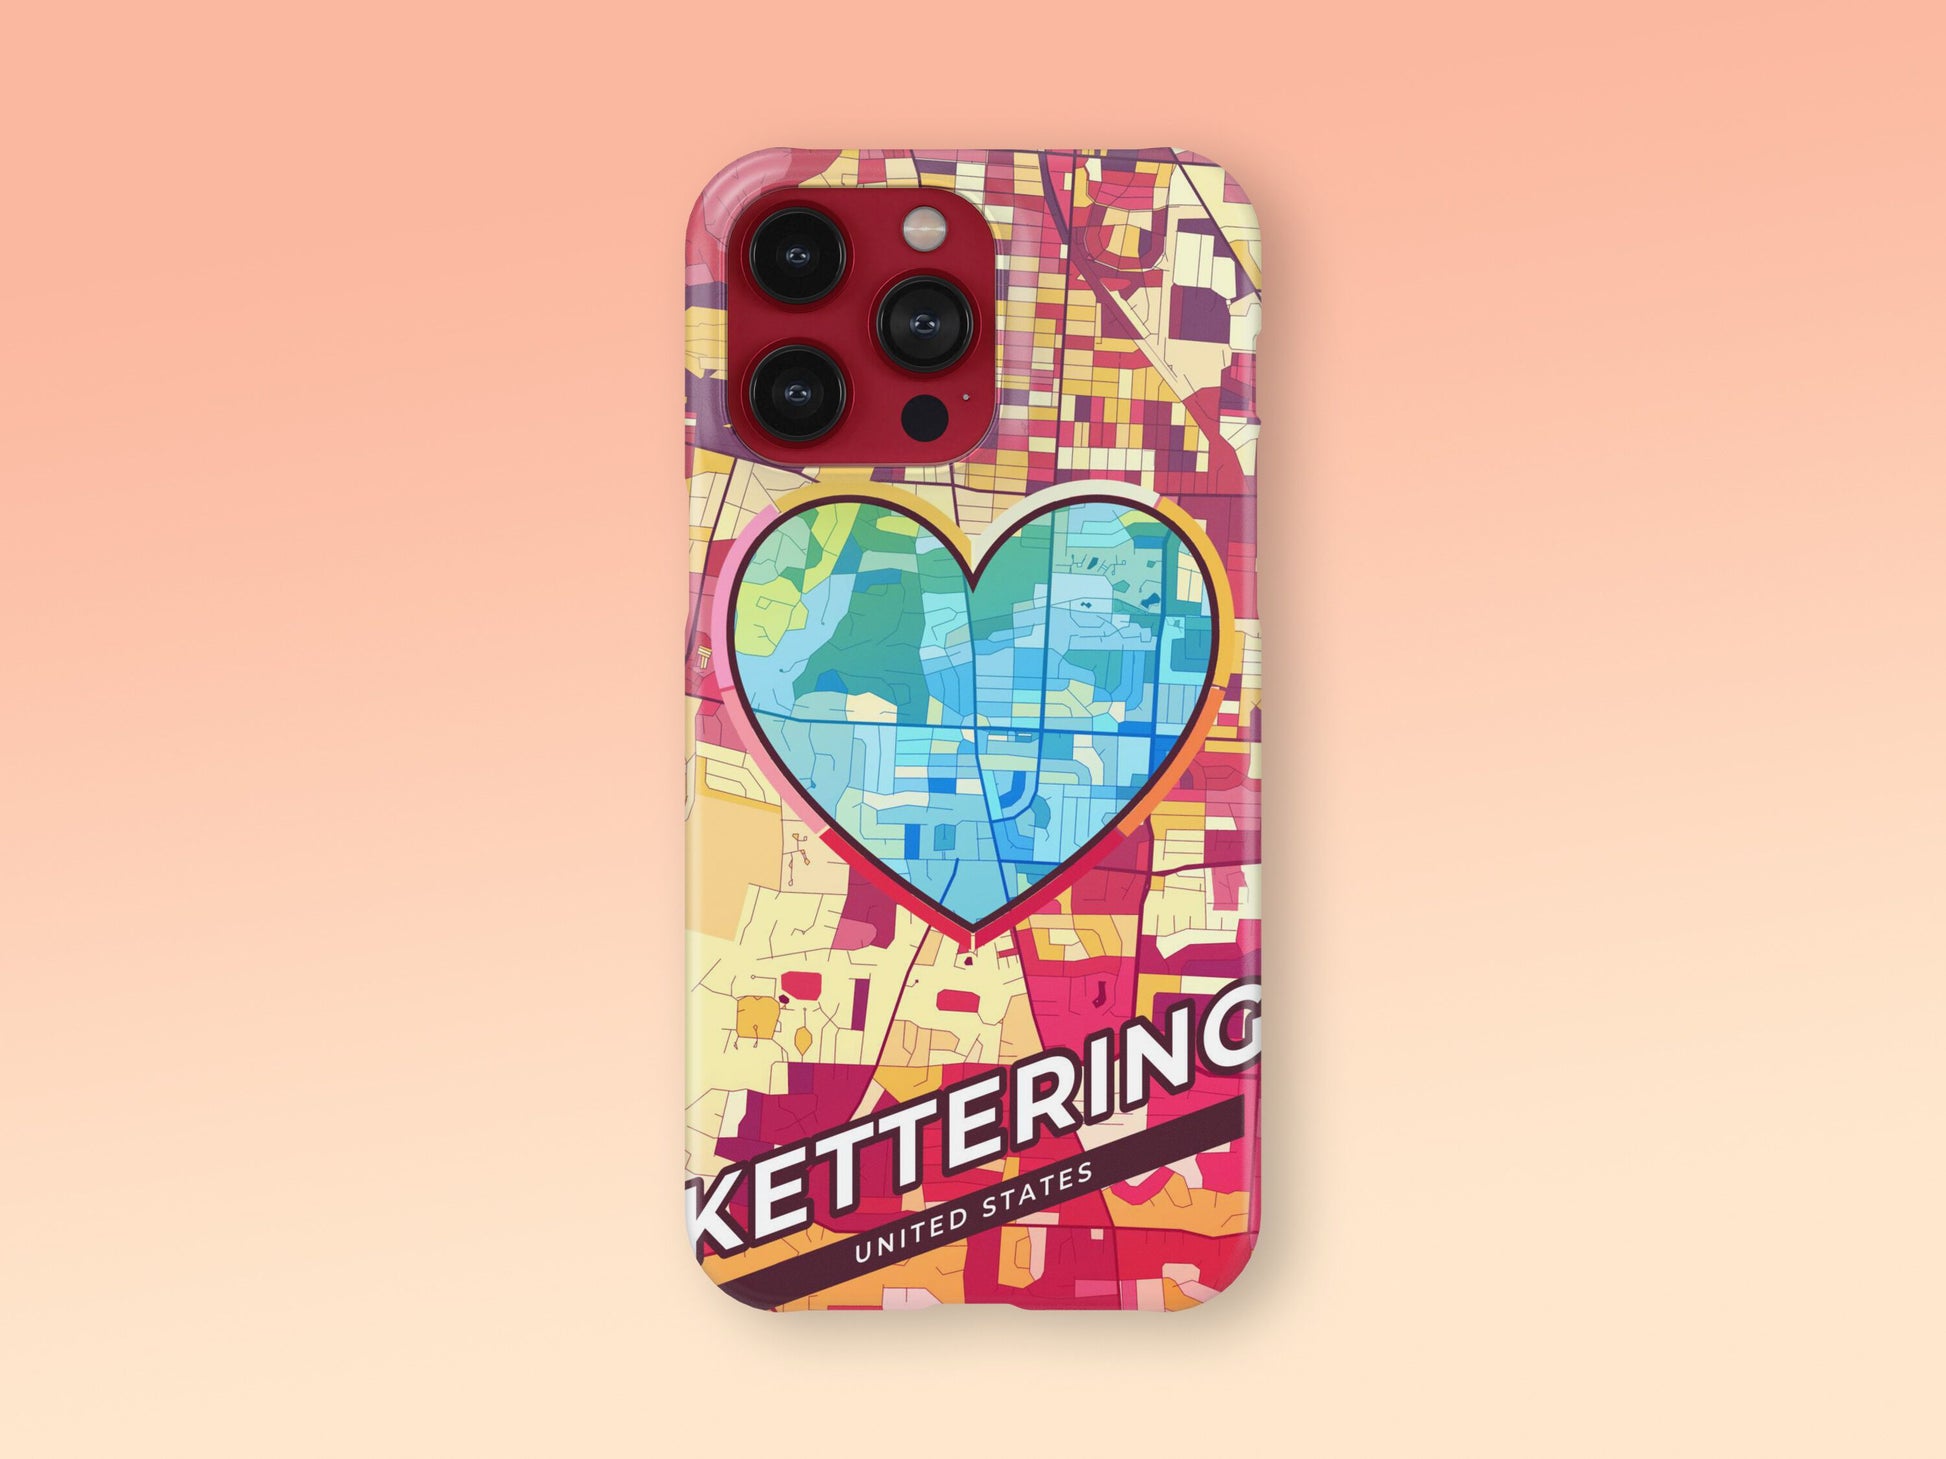 Kettering Ohio slim phone case with colorful icon. Birthday, wedding or housewarming gift. Couple match cases. 2